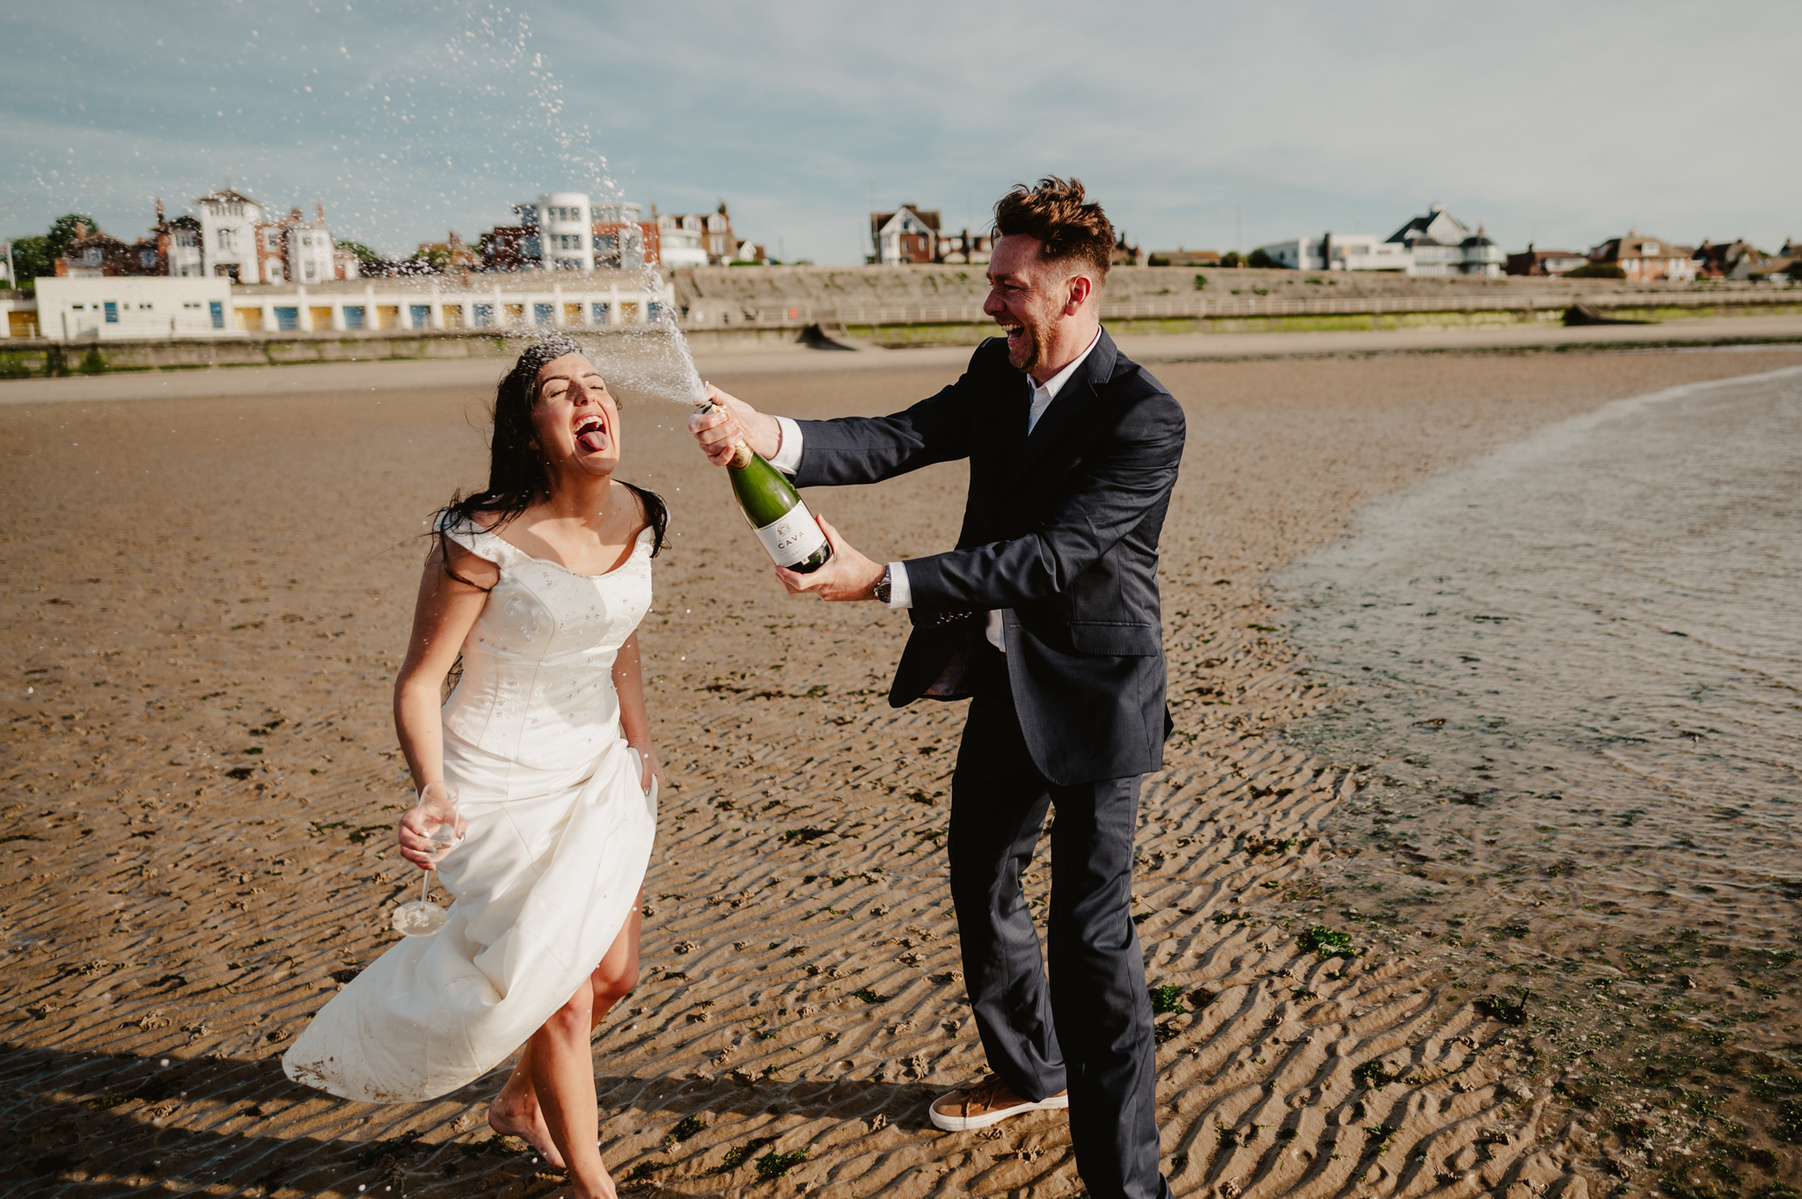 groom on west bay kent sprays champagne into brides mouth during fun wedding photography portraits